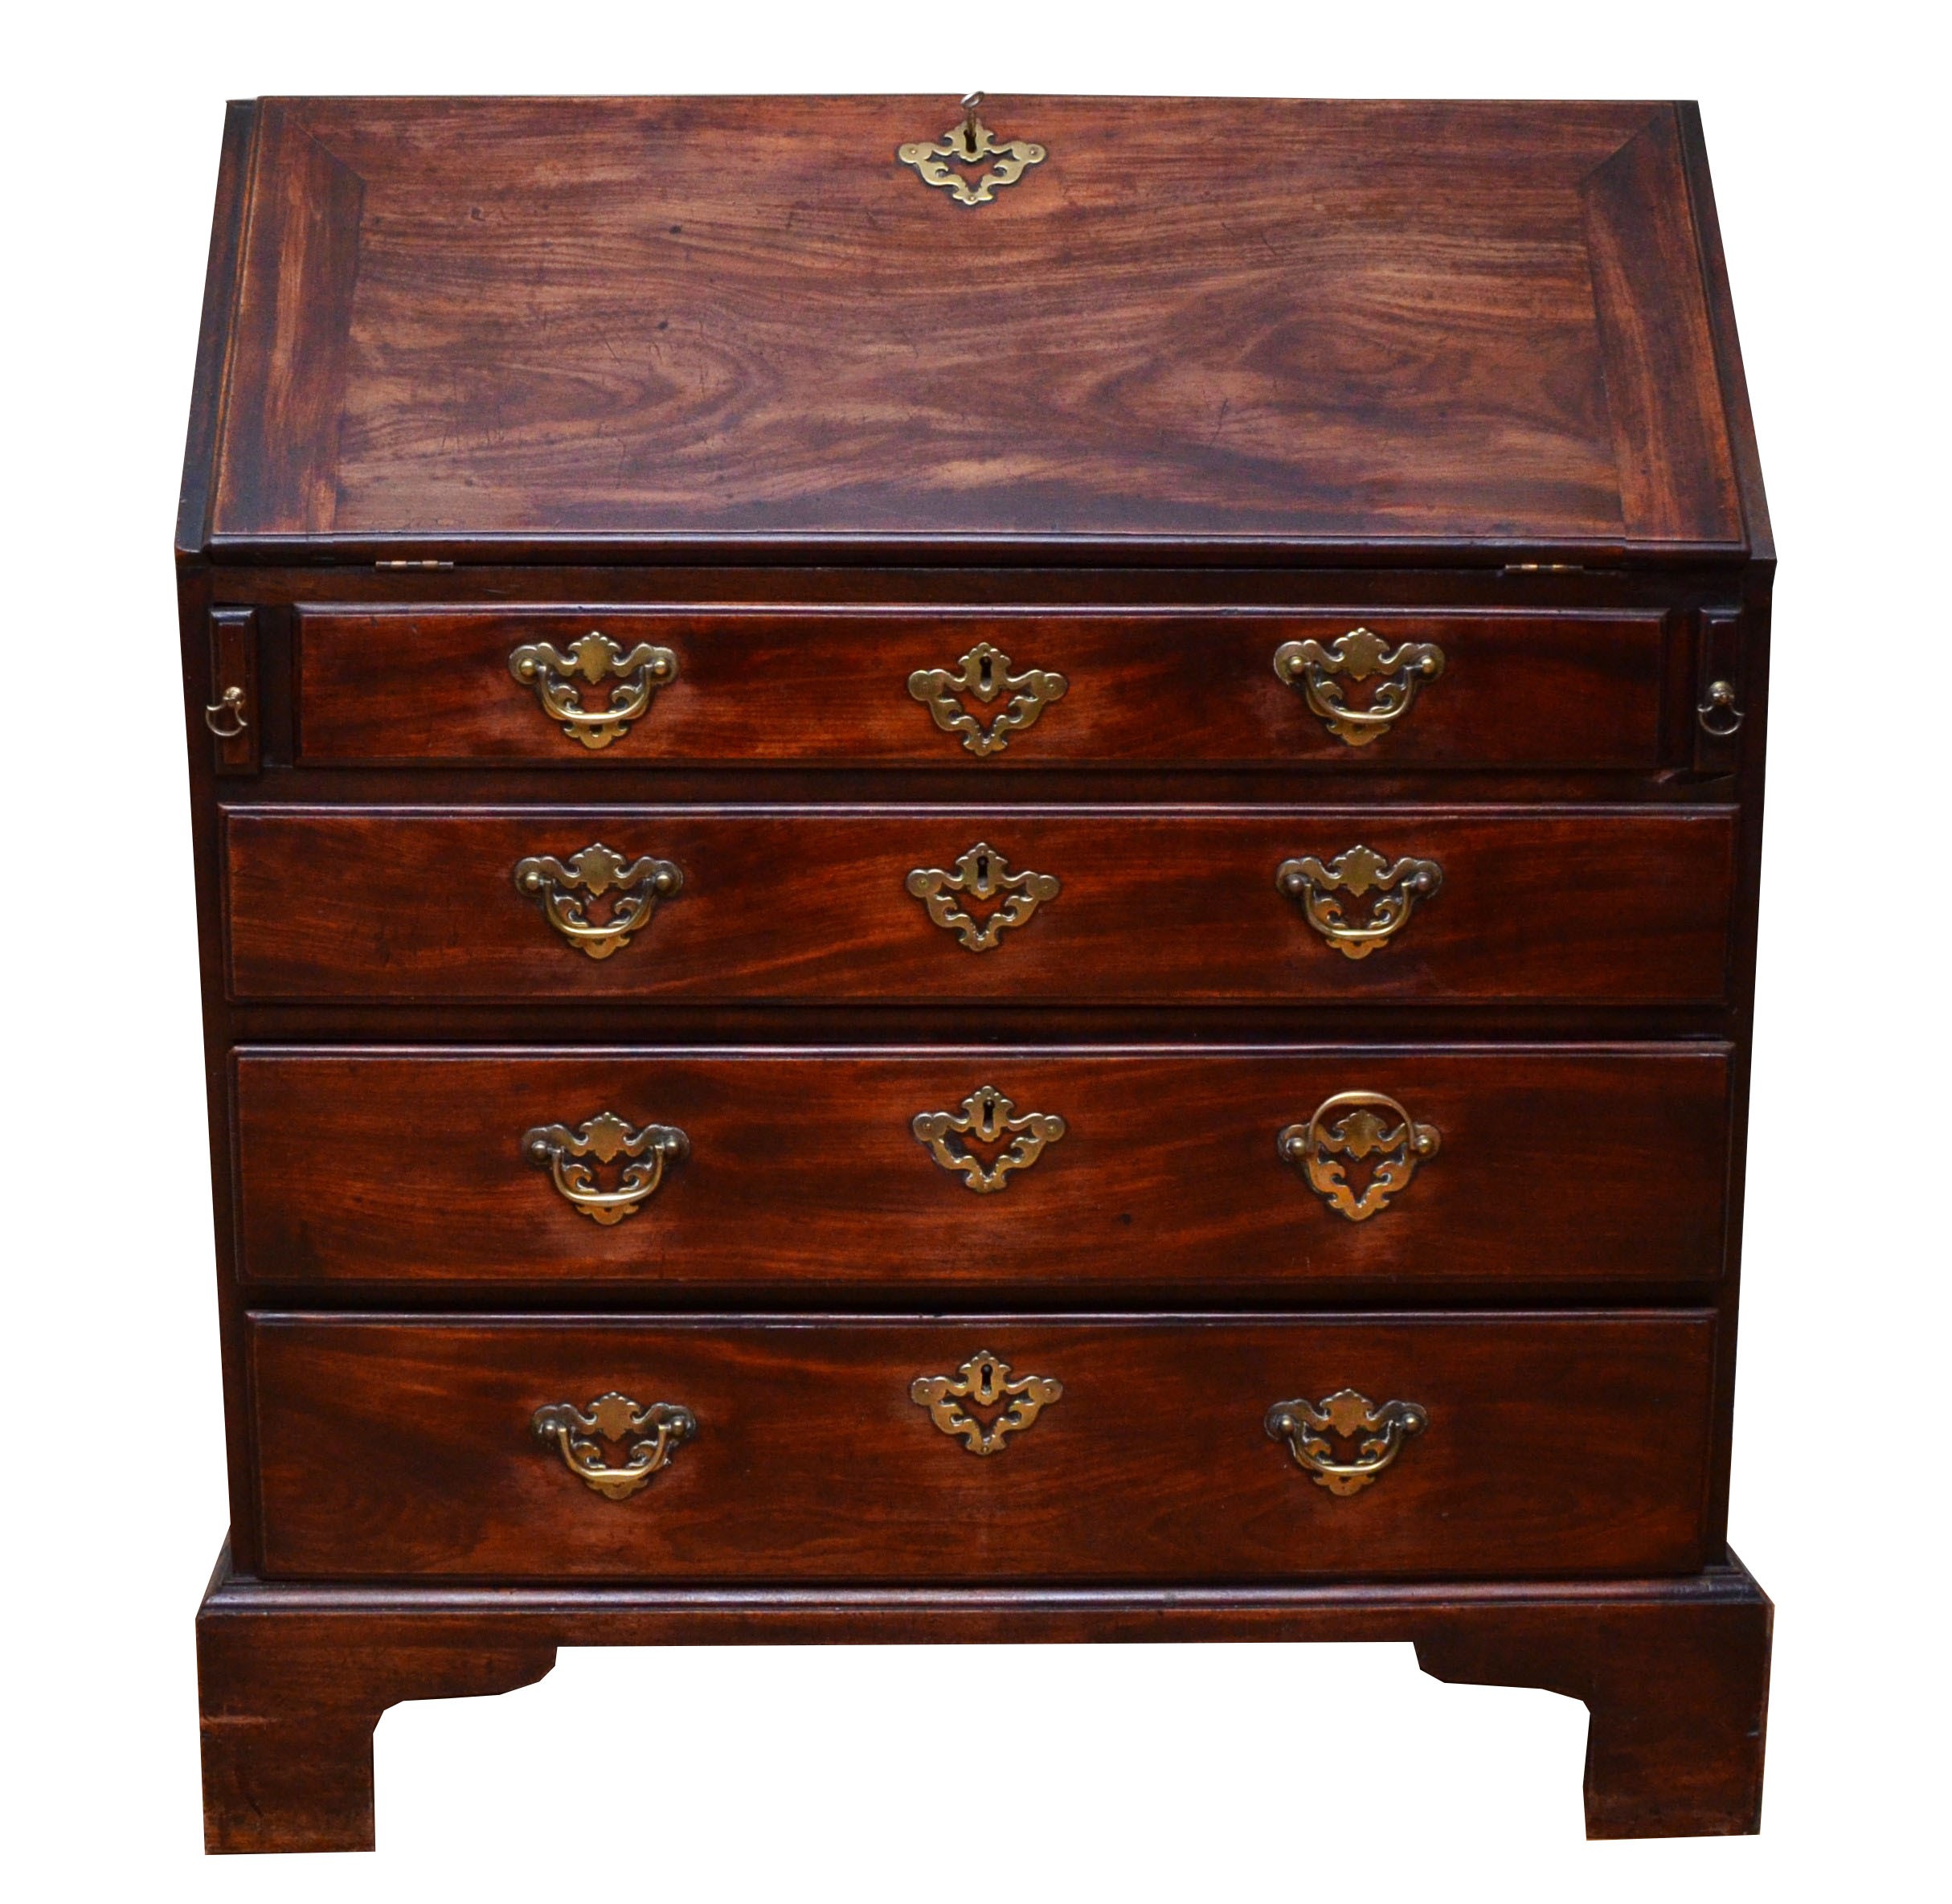 A Georgian mahogany bureau, moulded rectangular fall front with rounded upper corners opening to